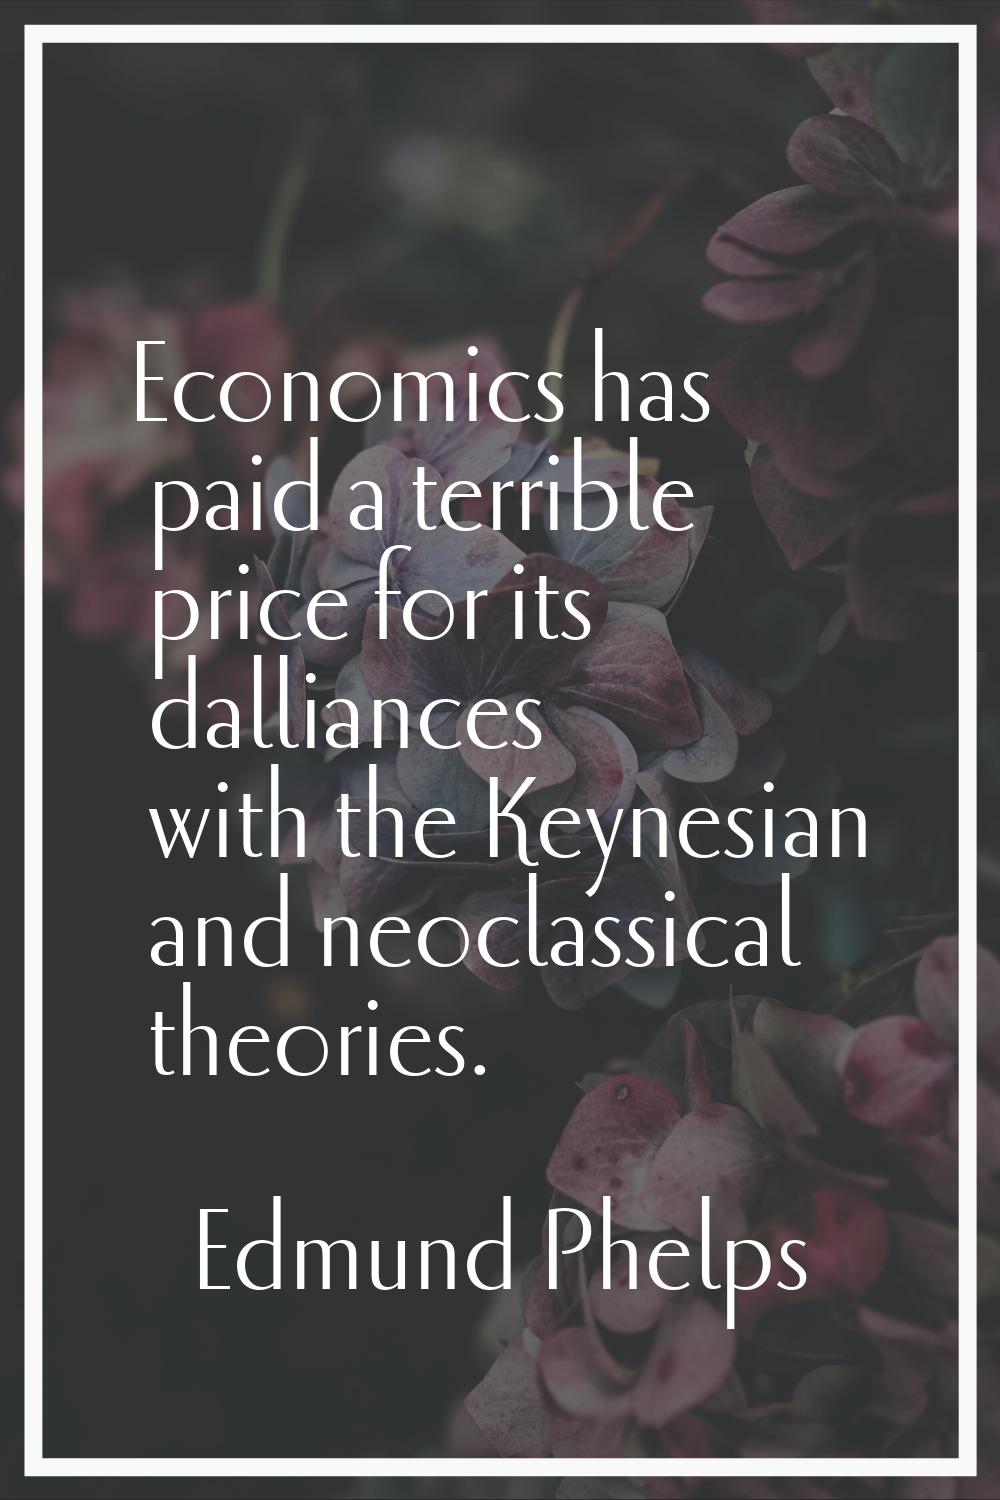 Economics has paid a terrible price for its dalliances with the Keynesian and neoclassical theories